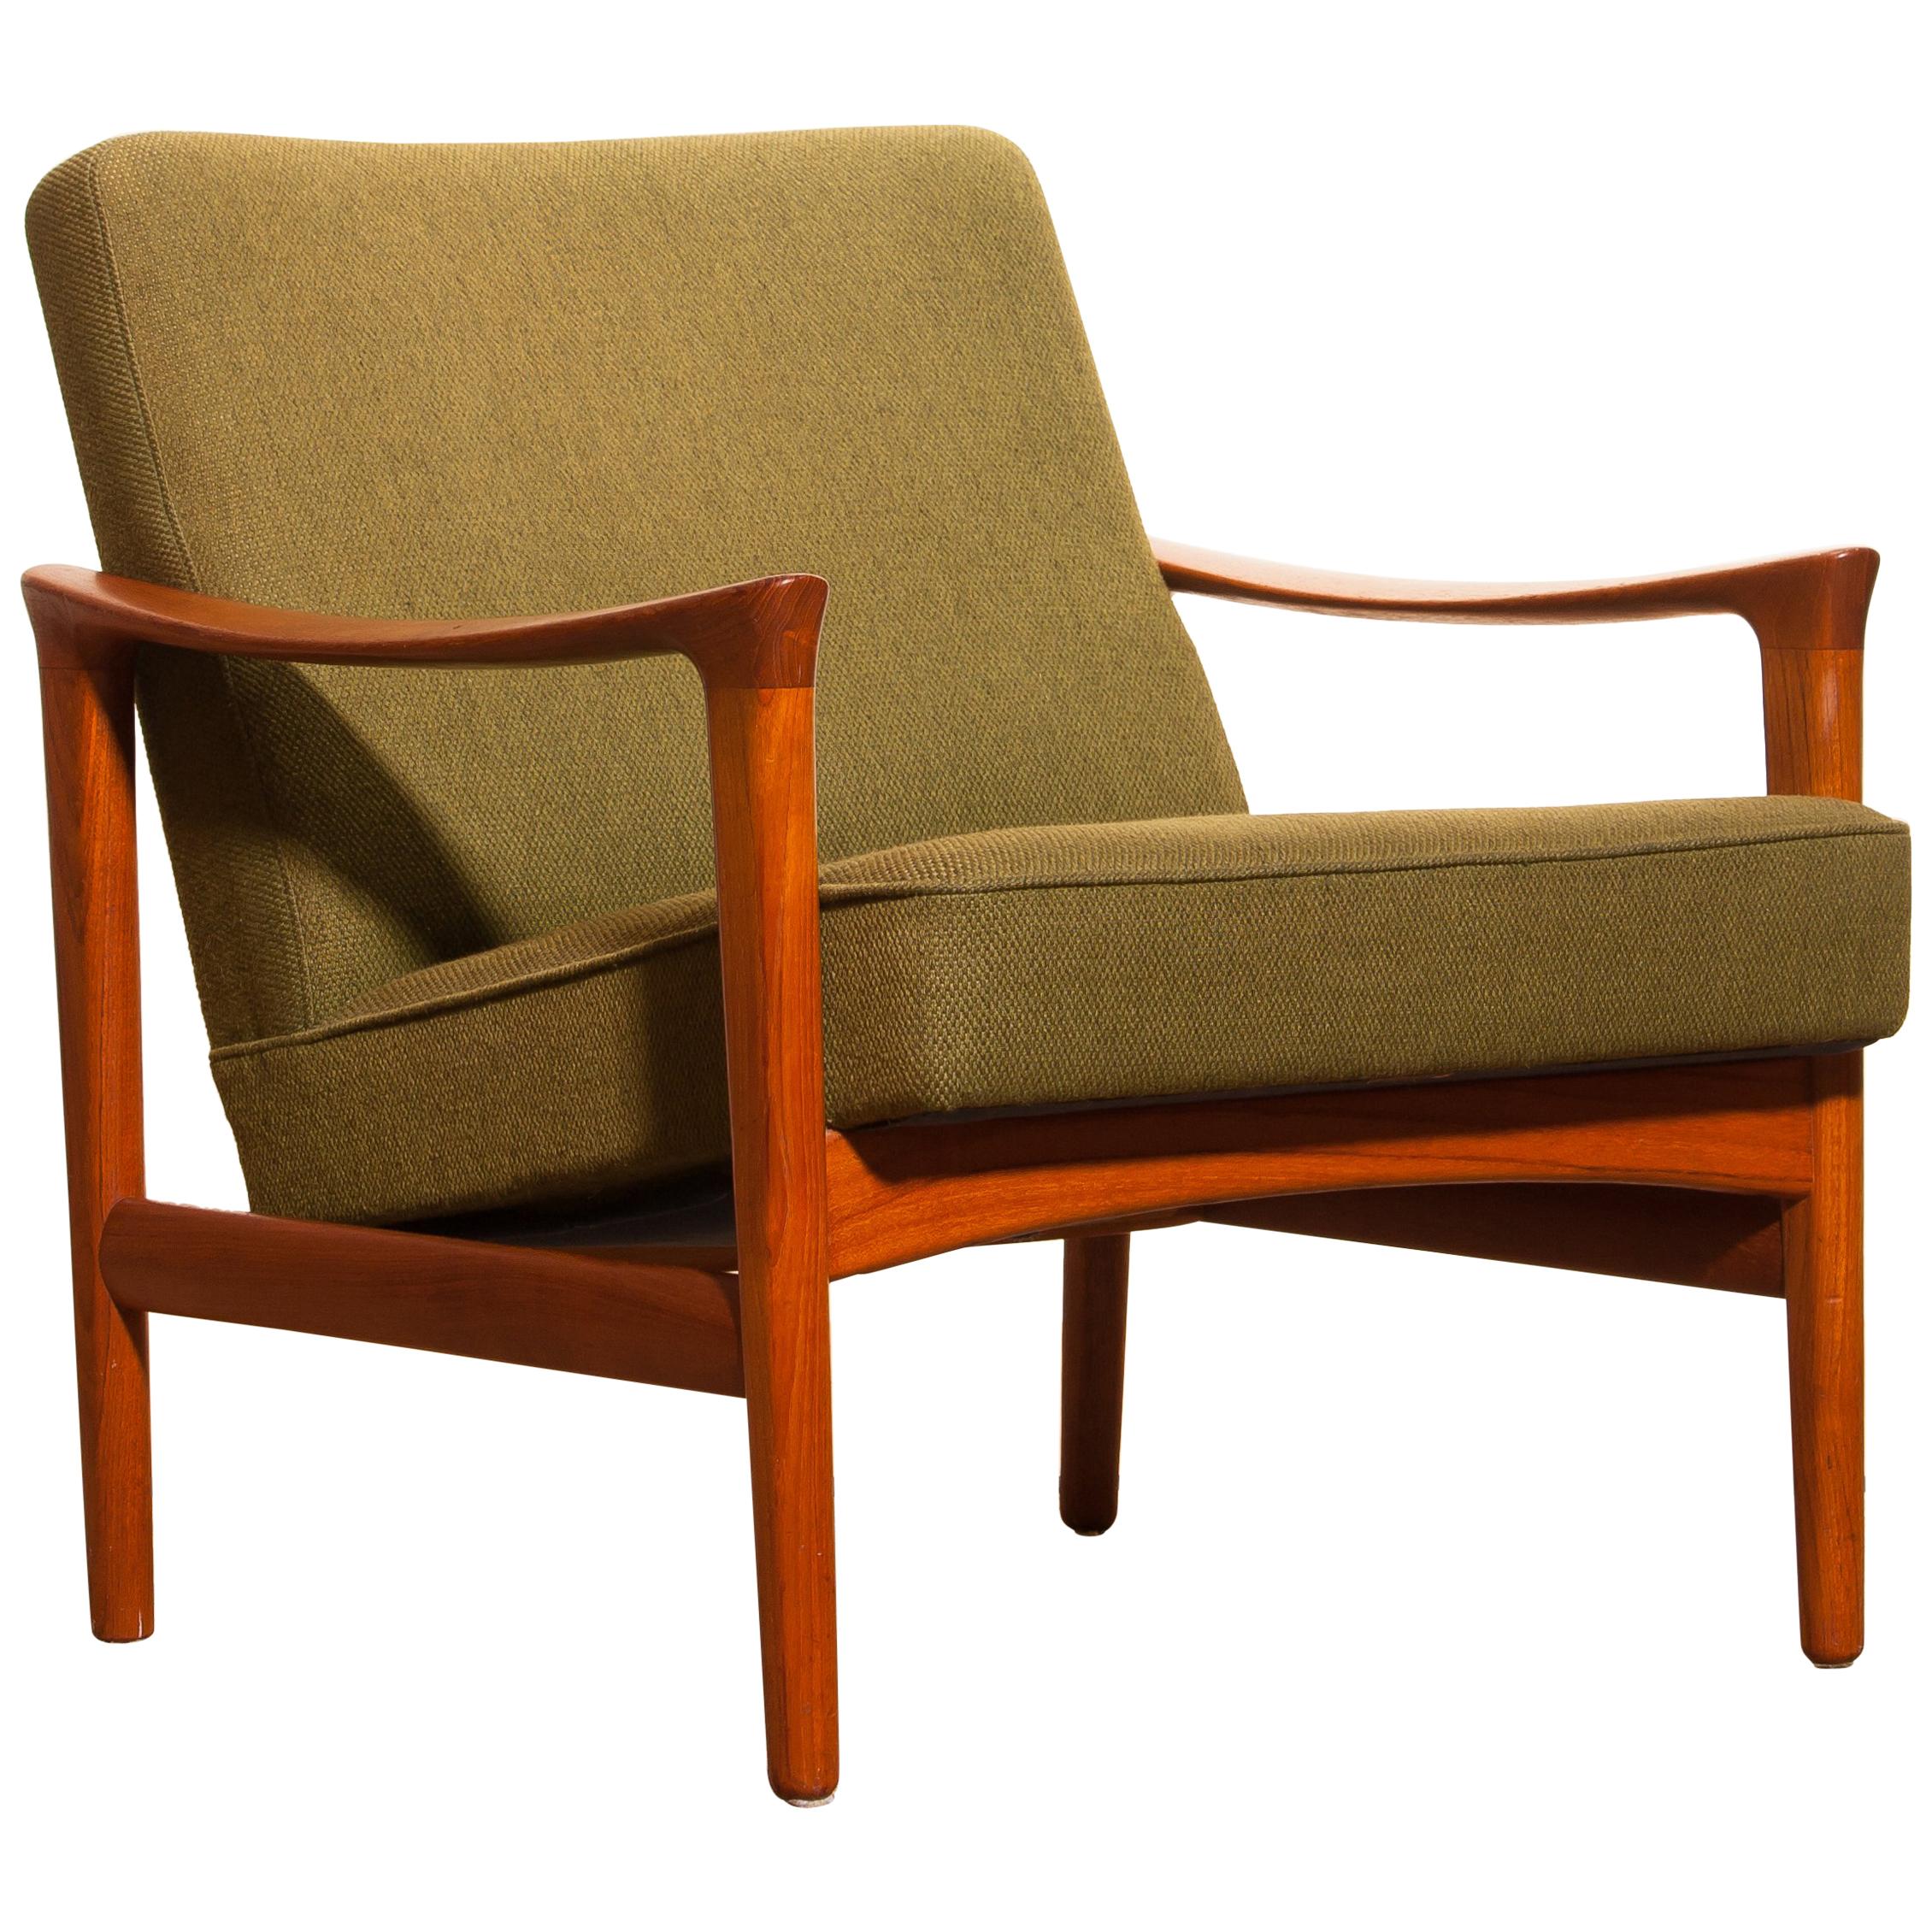 A beautiful lounge chair designed by Erik Wørts and produced by Bröderna Andersson, Sweden.
This chair is made of teak with green fabric upholstery.
It is in very good condition.
Period 1960-1969.
Dimensions: H 73 cm, W 70 cm, D 70 cm, SH 42